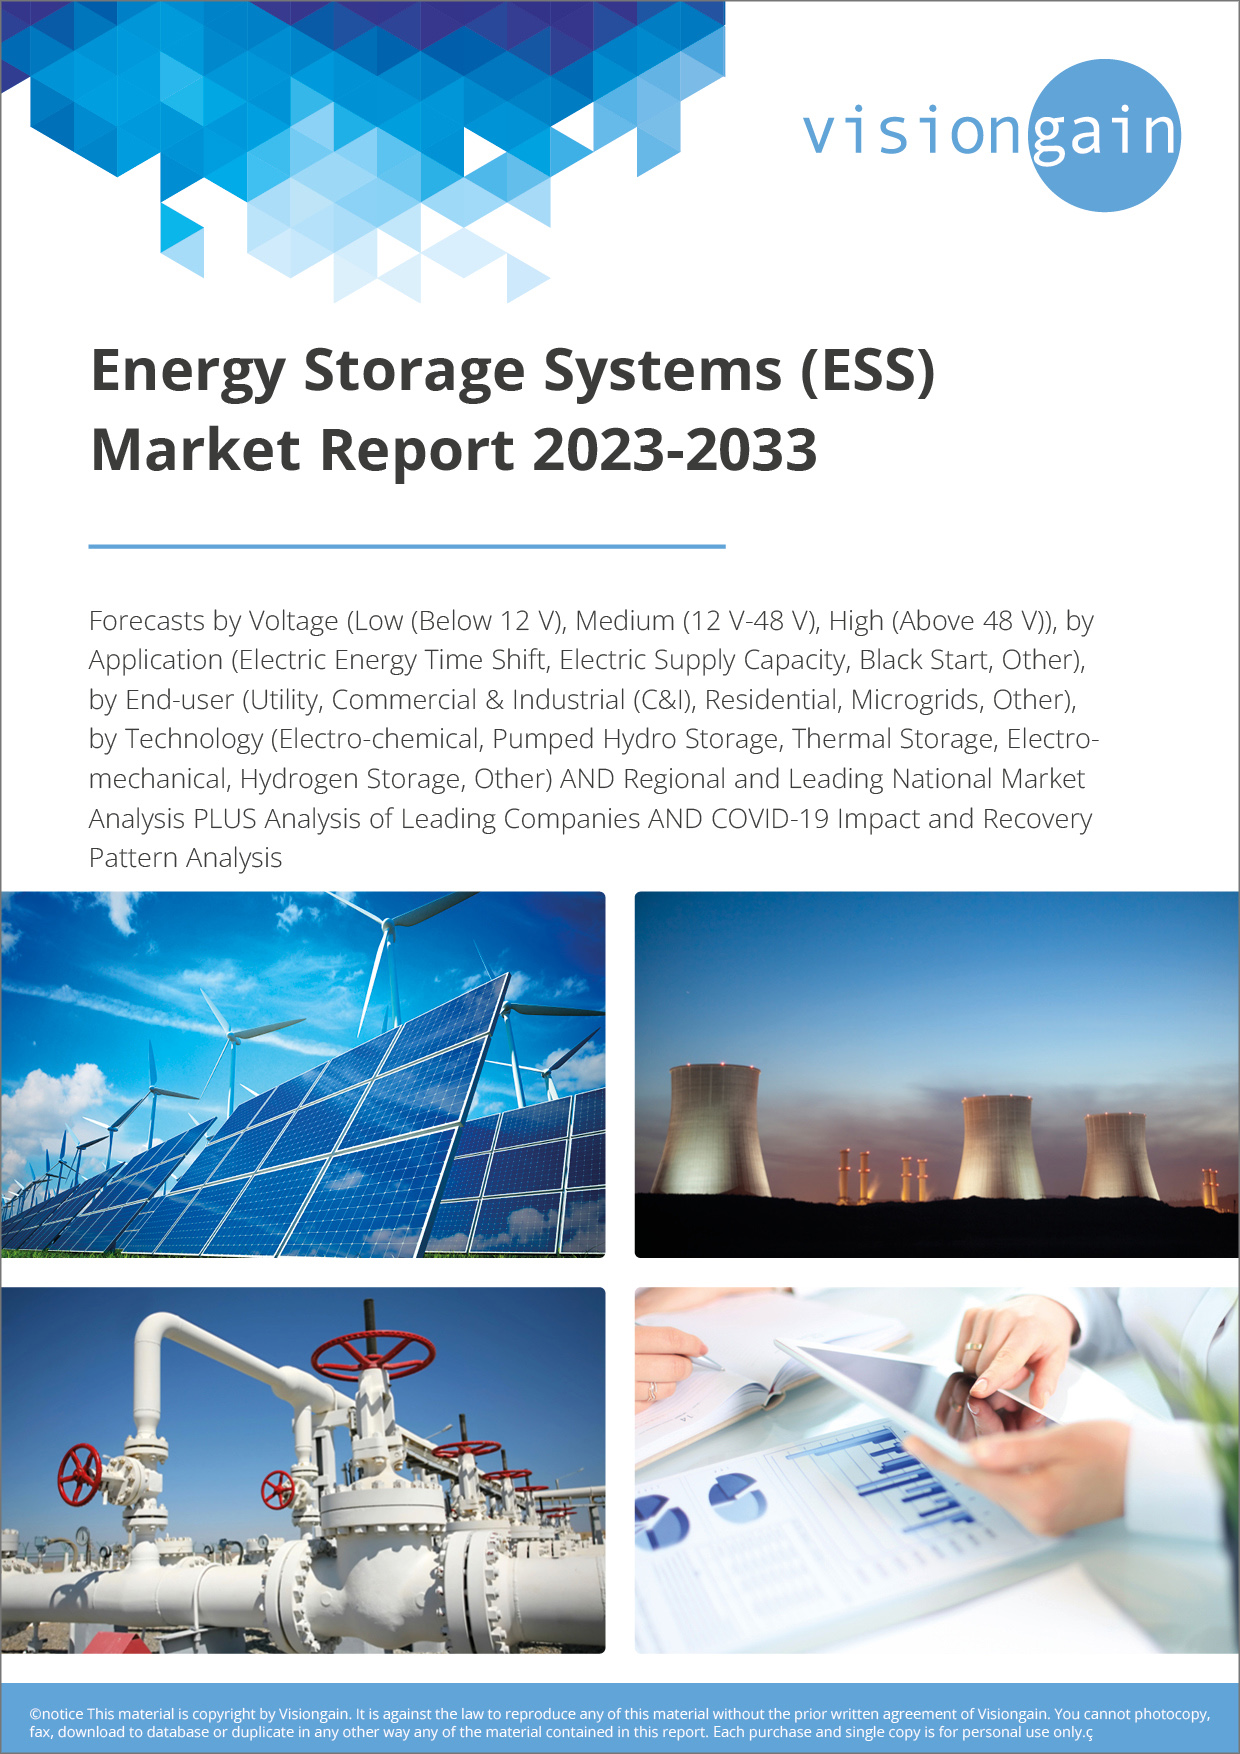 Energy Storage Systems (ESS) Market Report 2023-2033